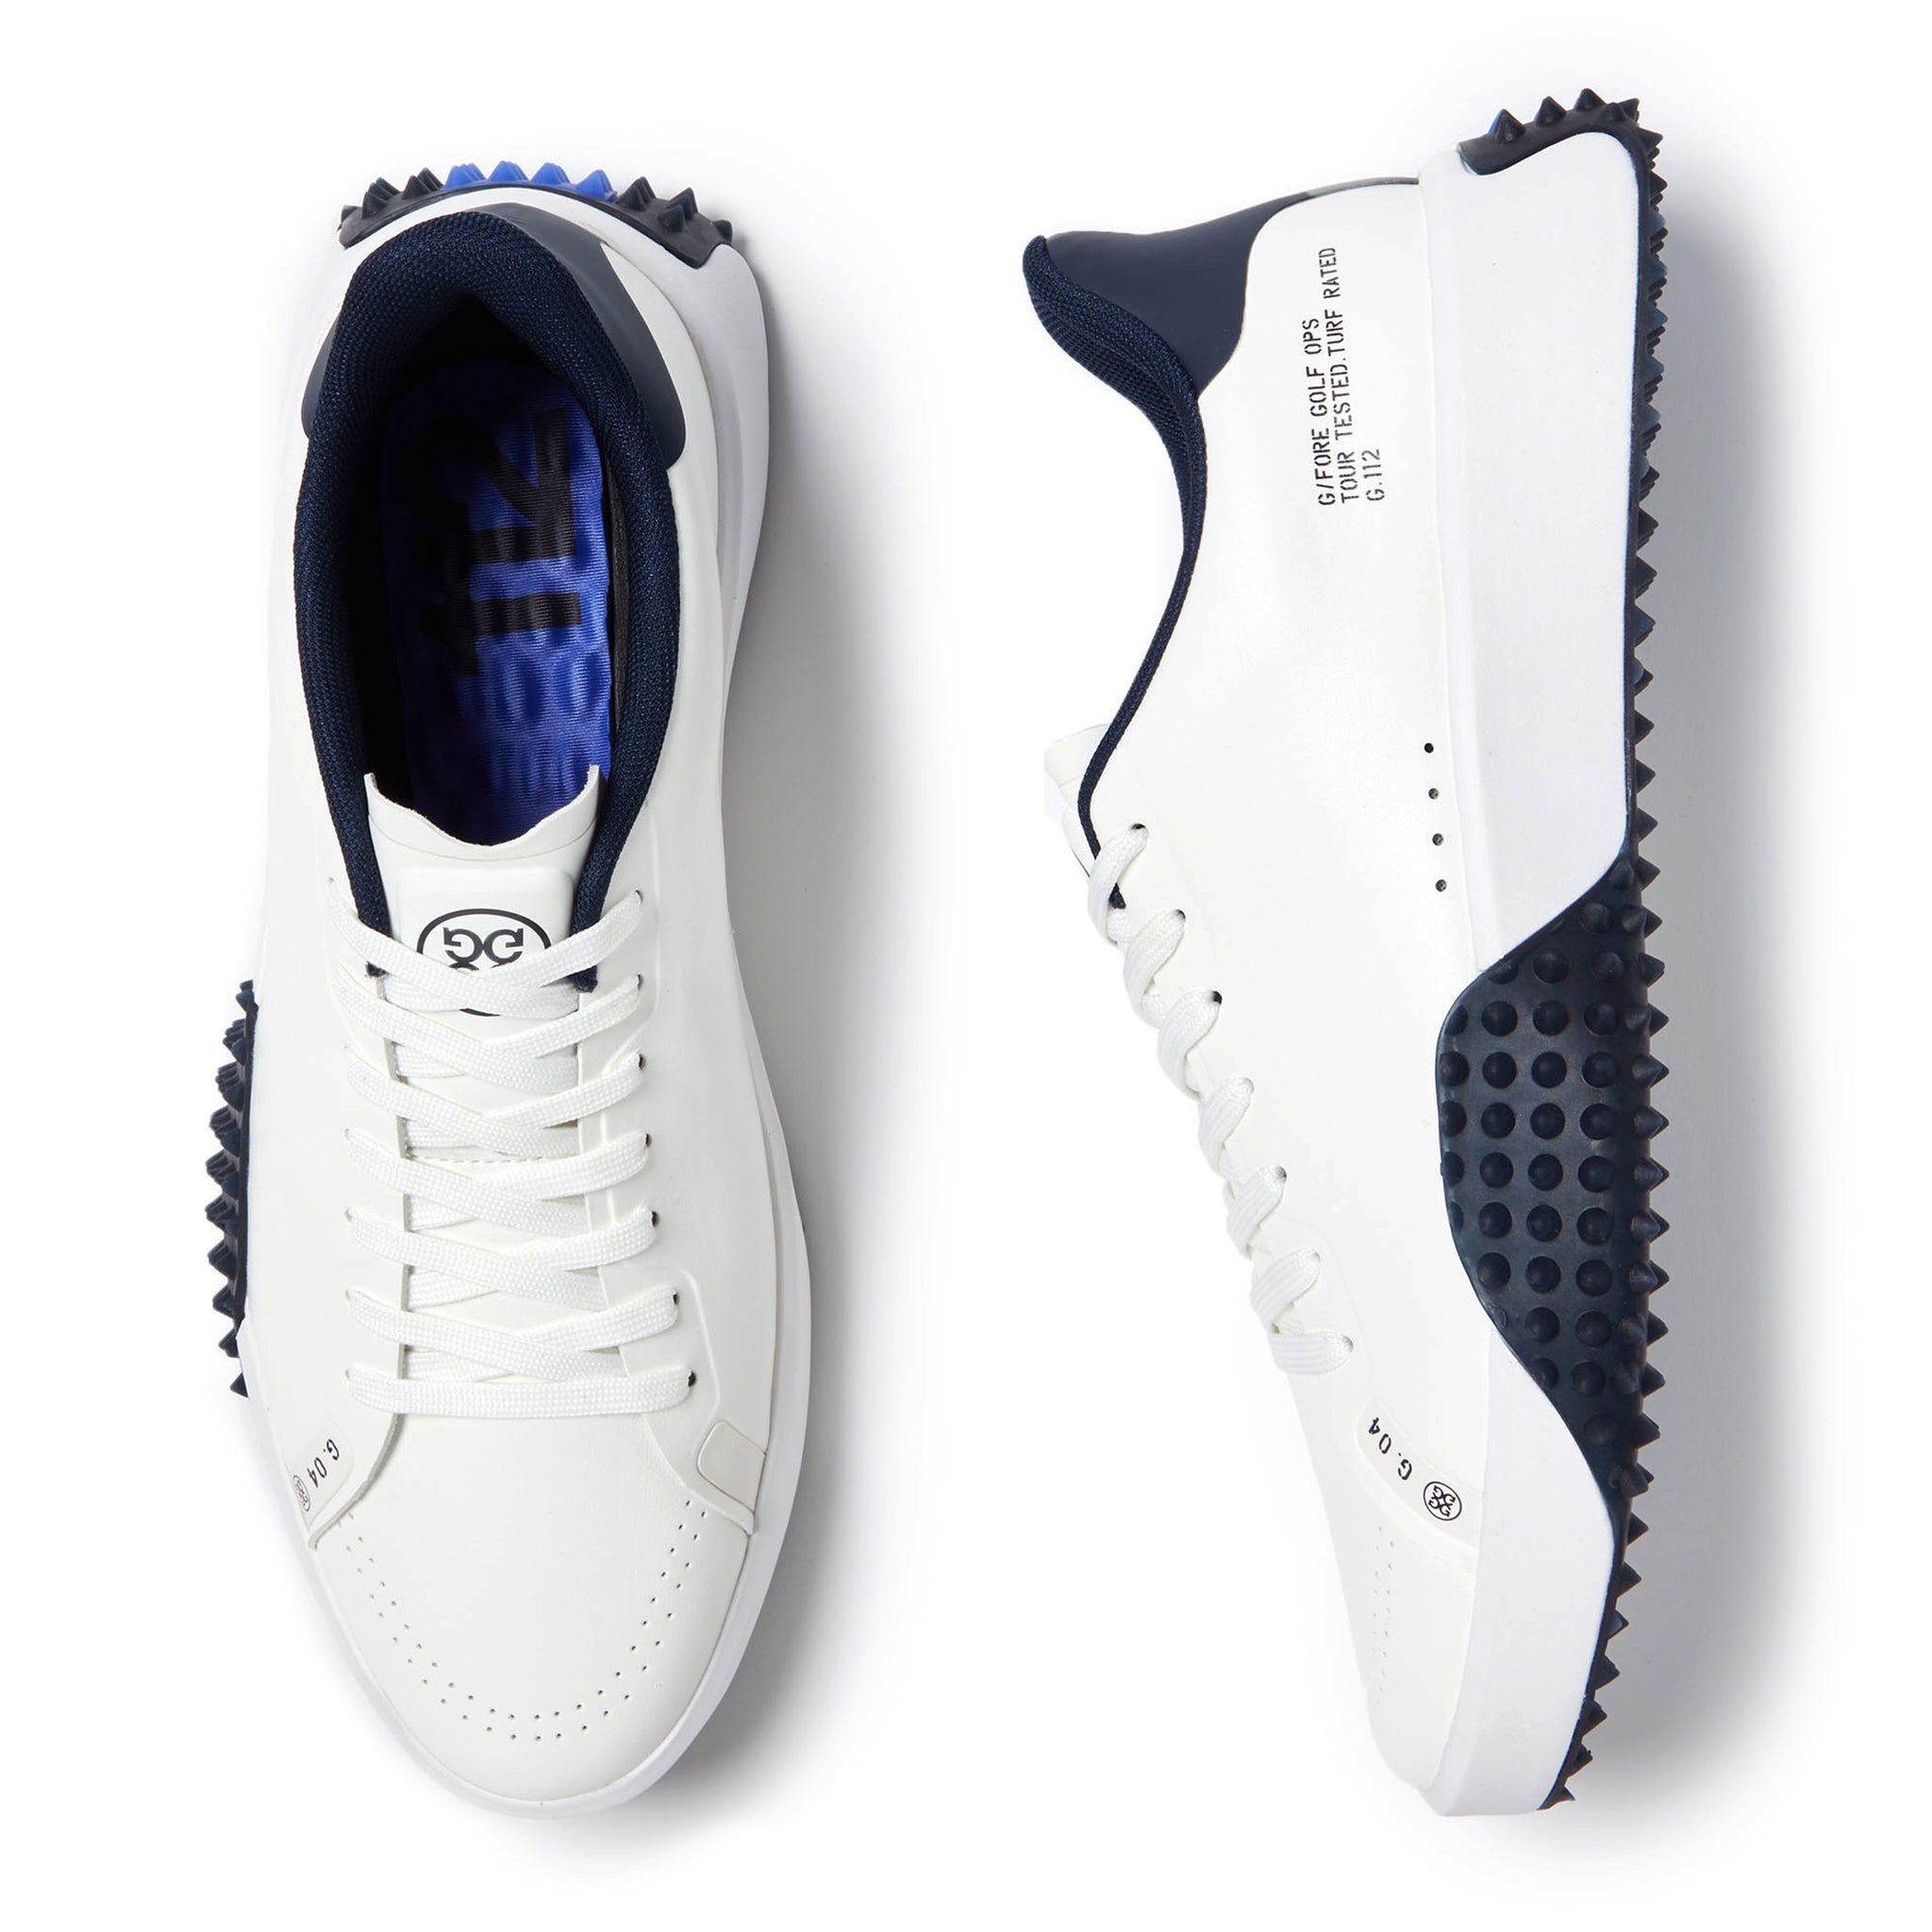 g-fore-g-122-golf-shoes-gmf000027-snow-twilight